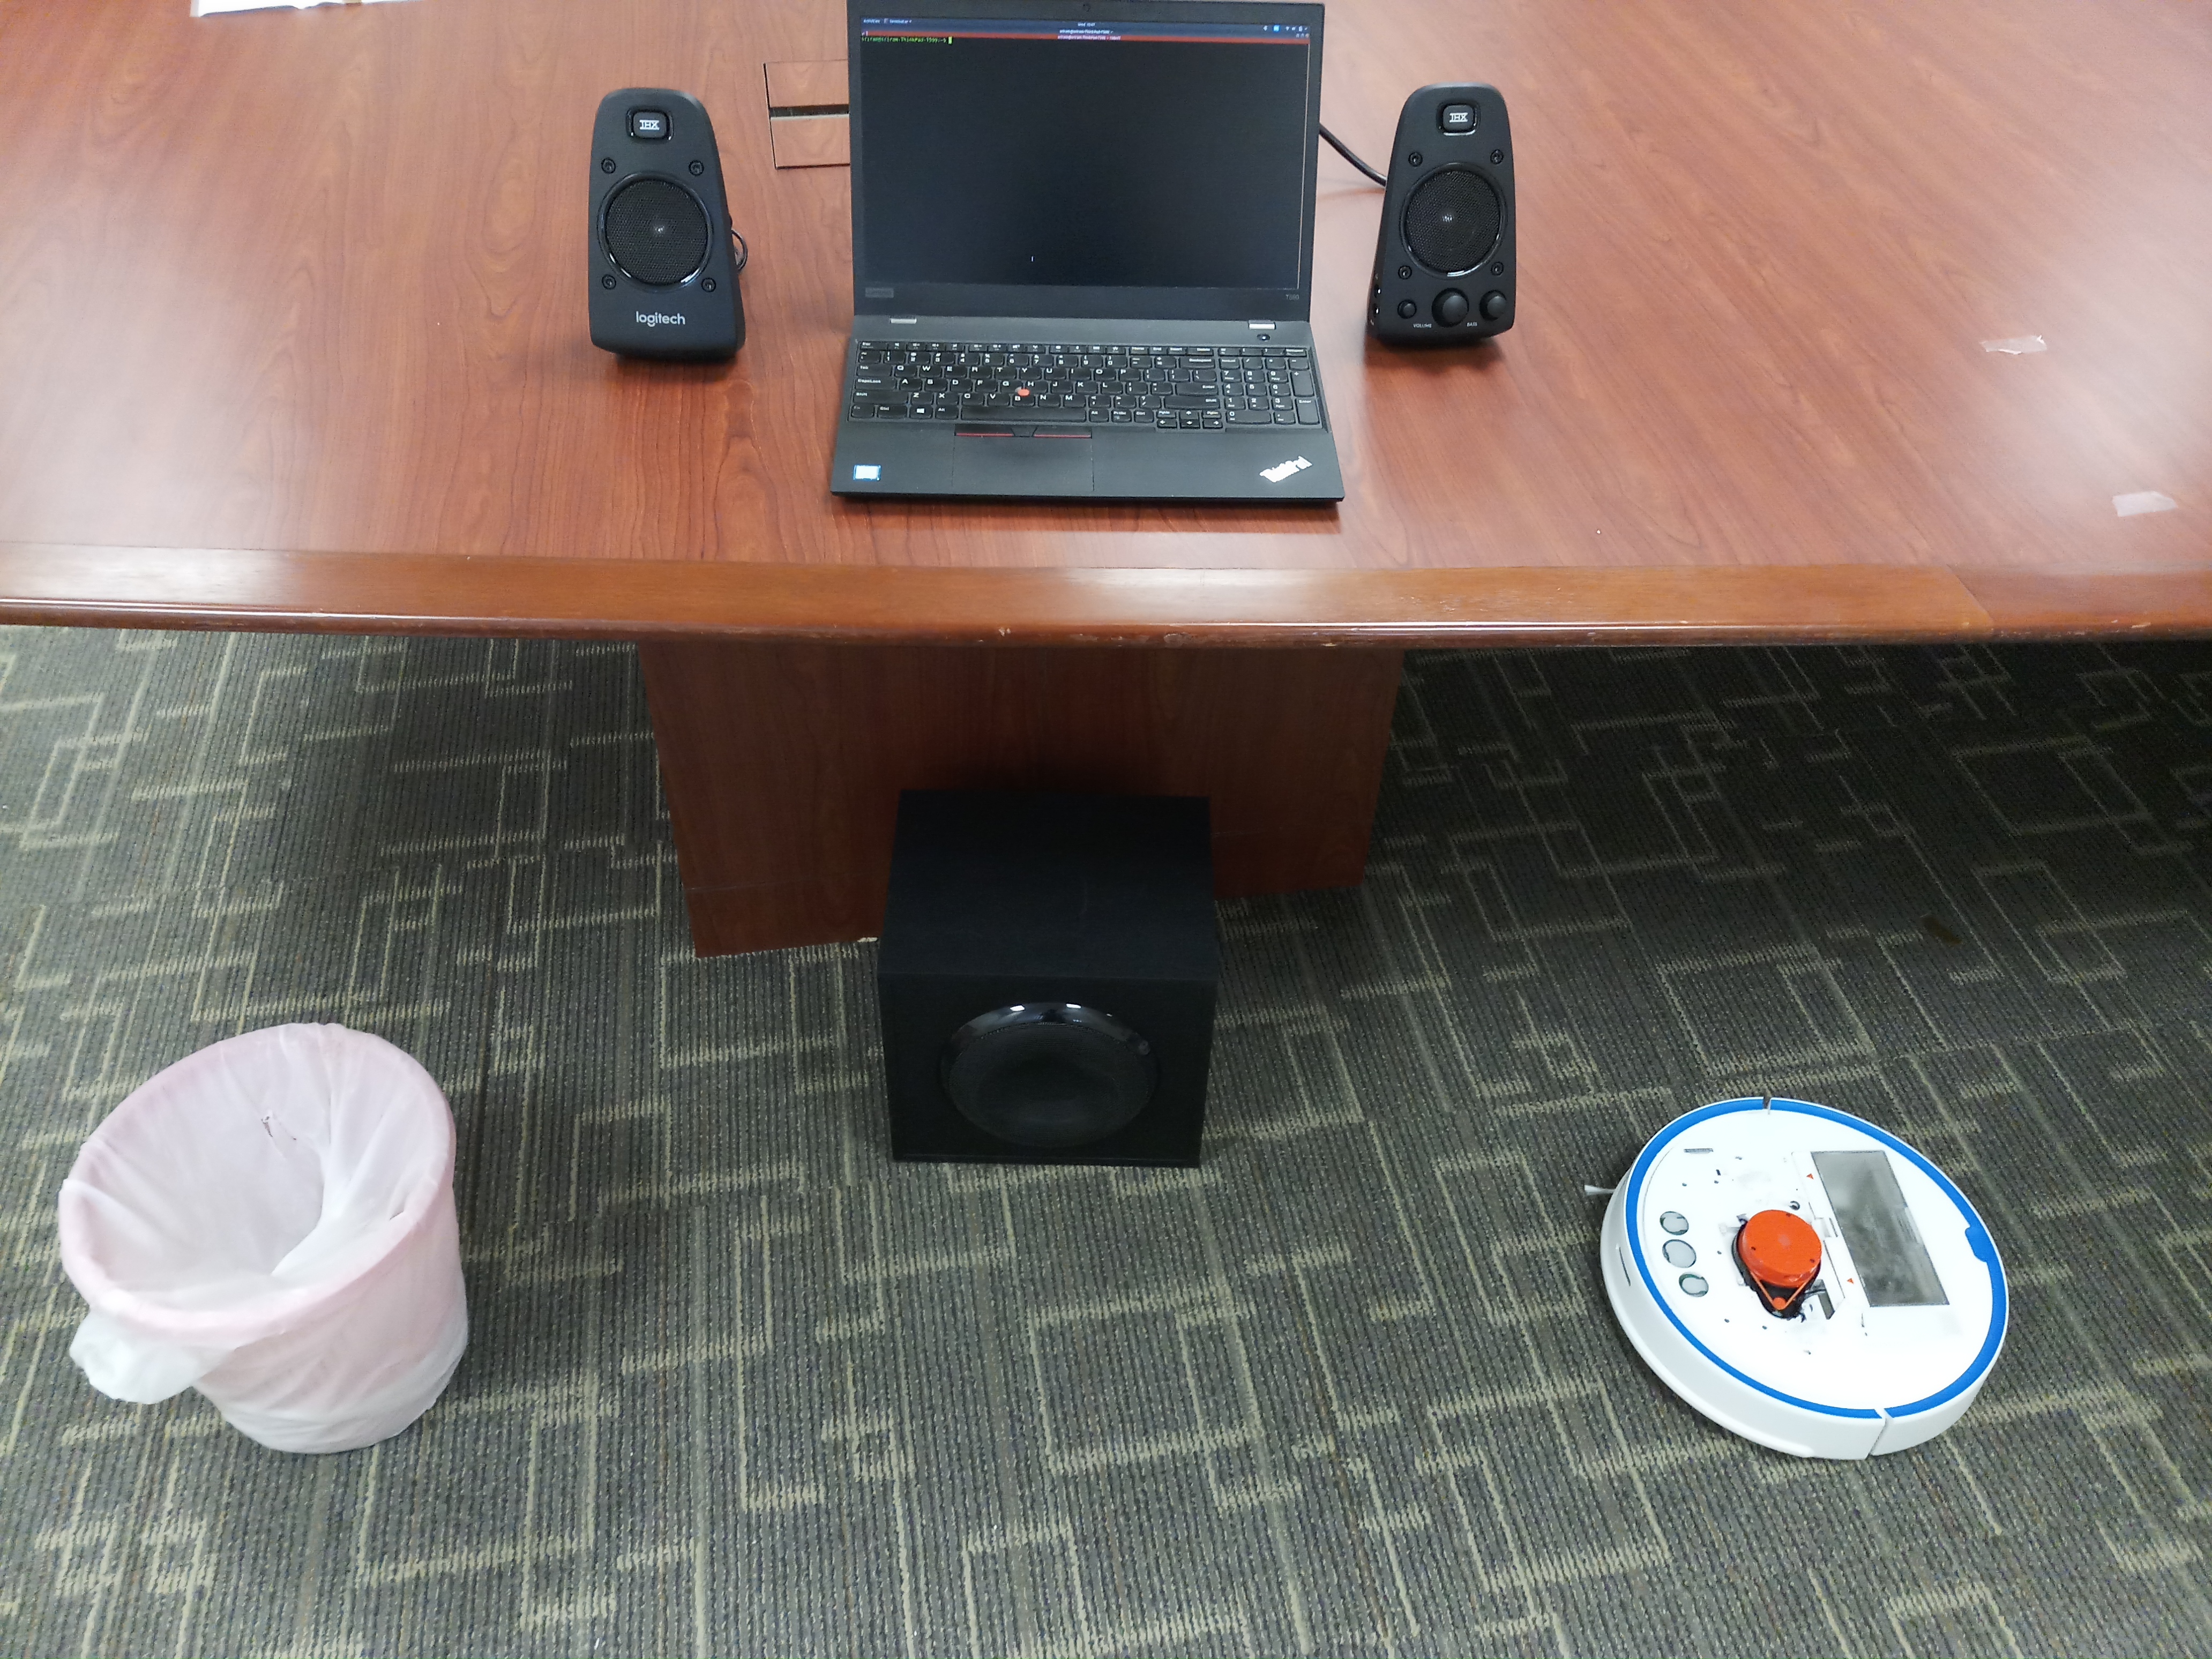 Researchers repurposed the laser-based navigation system on a vacuum robot (right) to pick up sound vibrations and capture human speech bouncing off objects like a trash can placed near a computer speaker on the floor. Photo credit: Sriram Sami